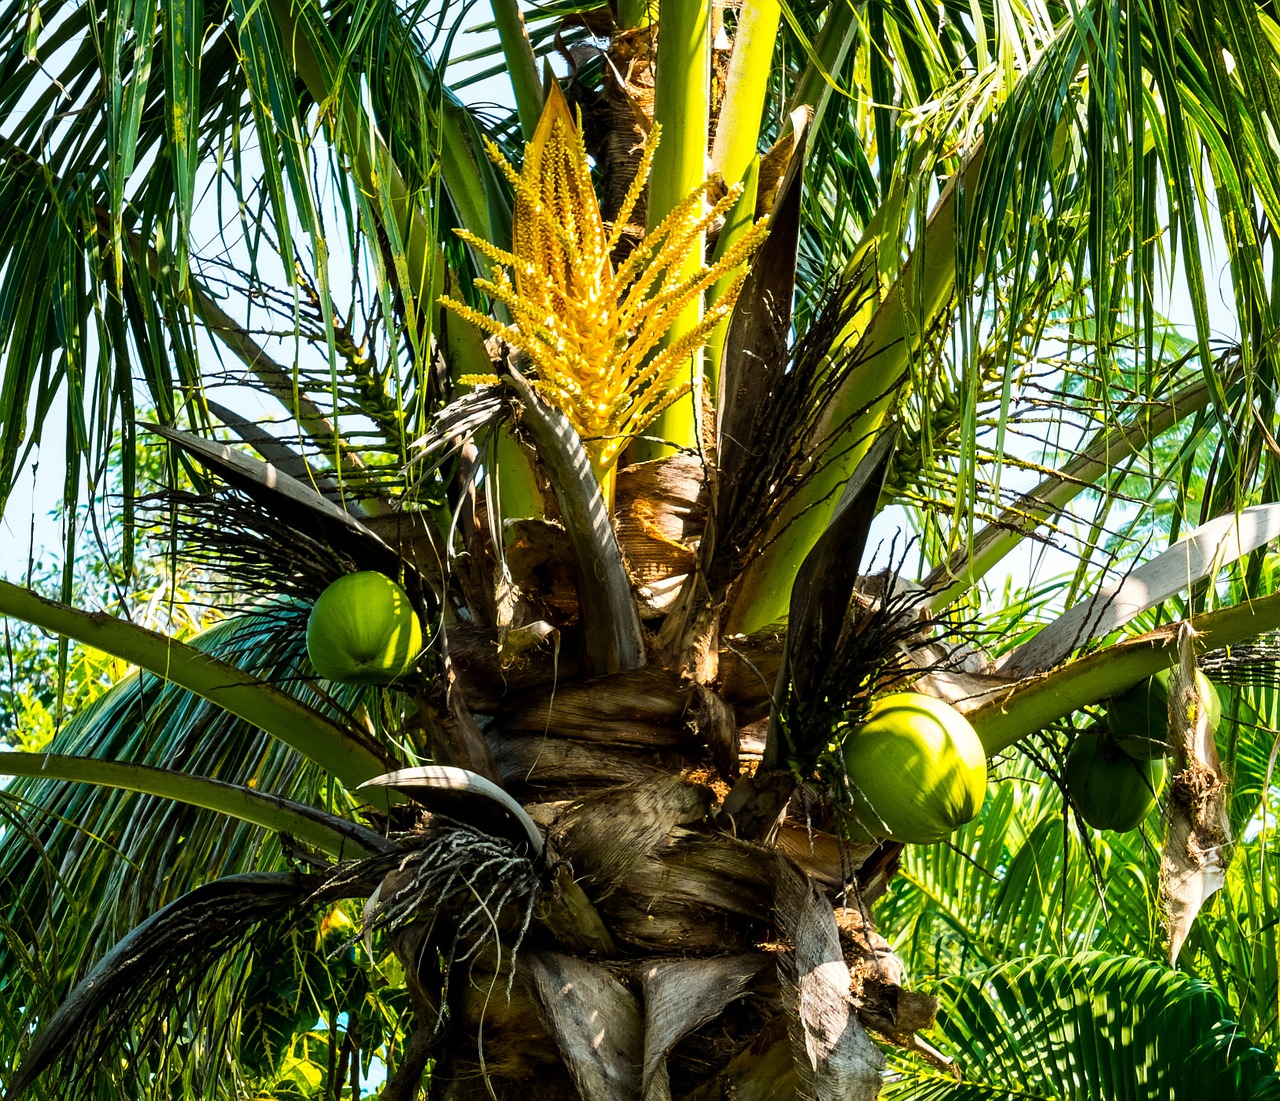 Palm,coconut tree,coconut,palm blossom,free pictures - free image from ...